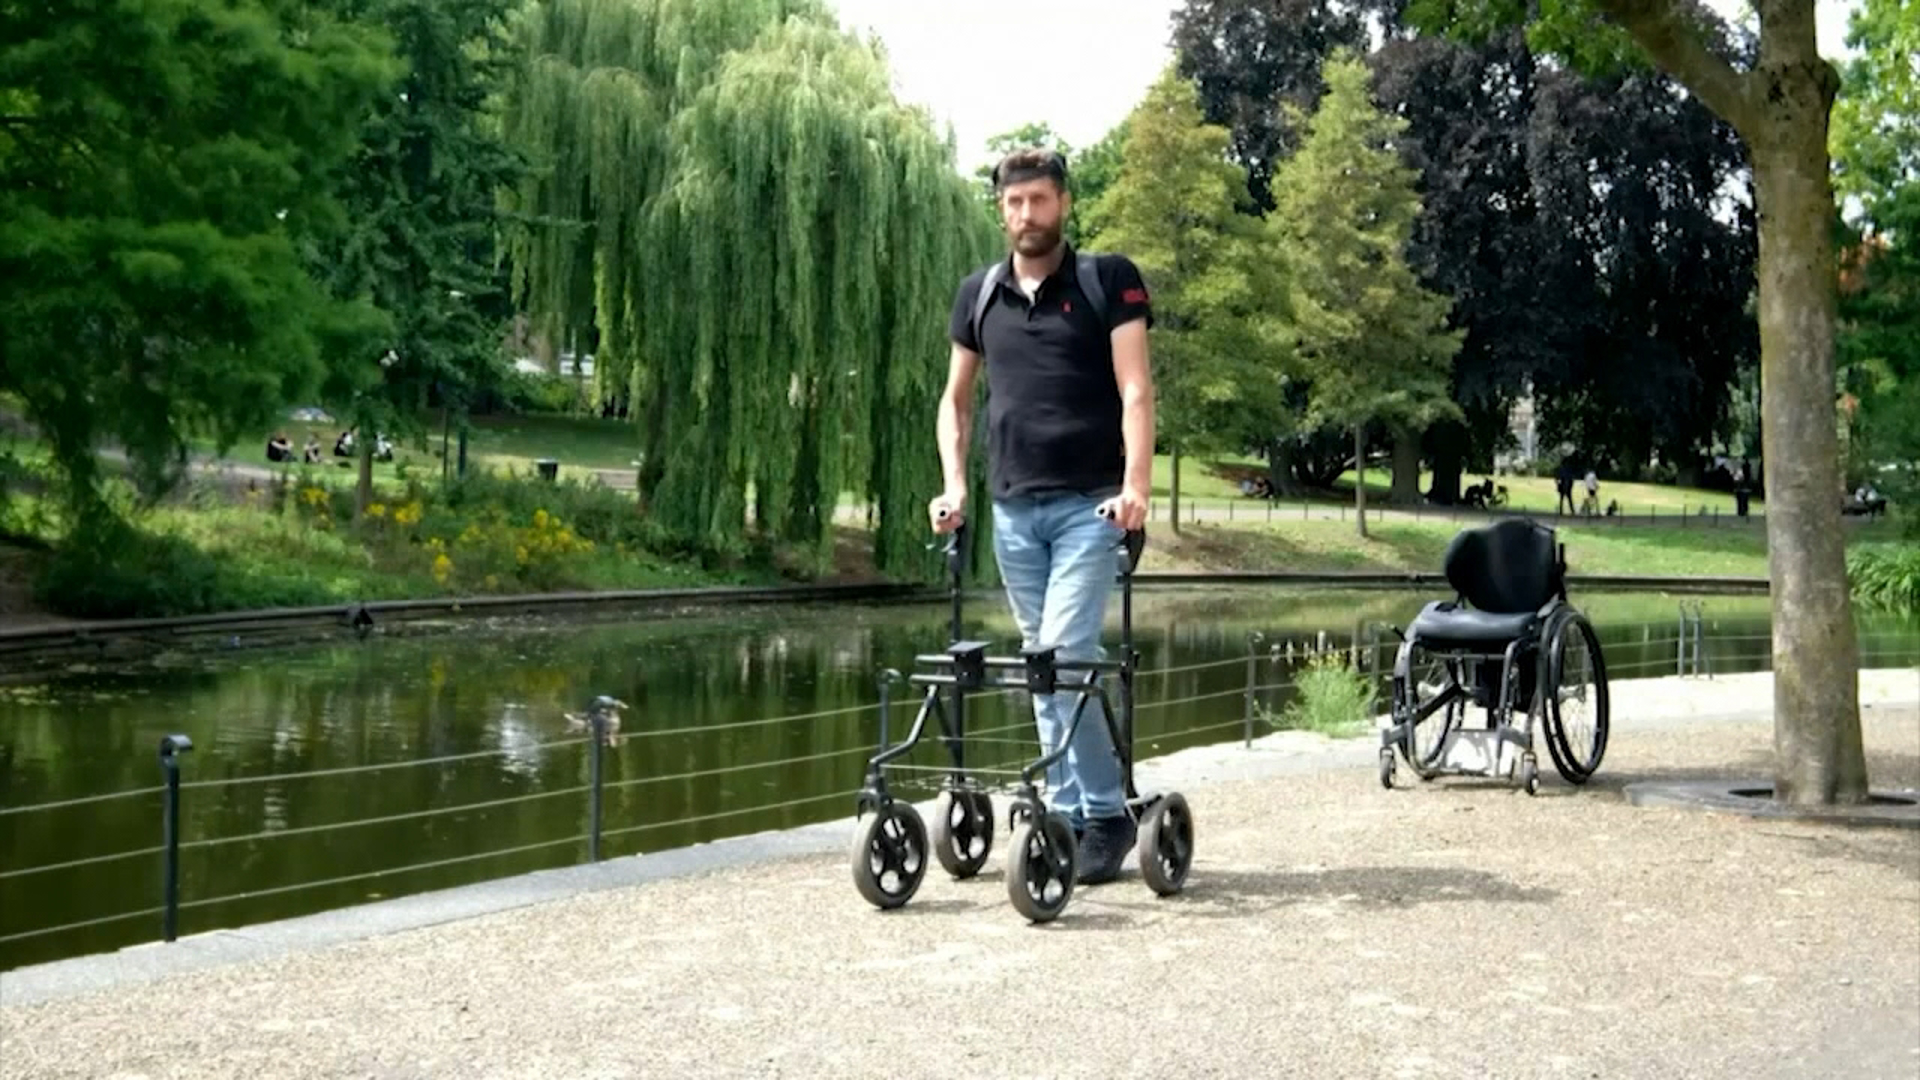 Researchers have developed a device that connects a paralyzed person's brain signals to their spinal cord, so when they think about walking, their legs respond.